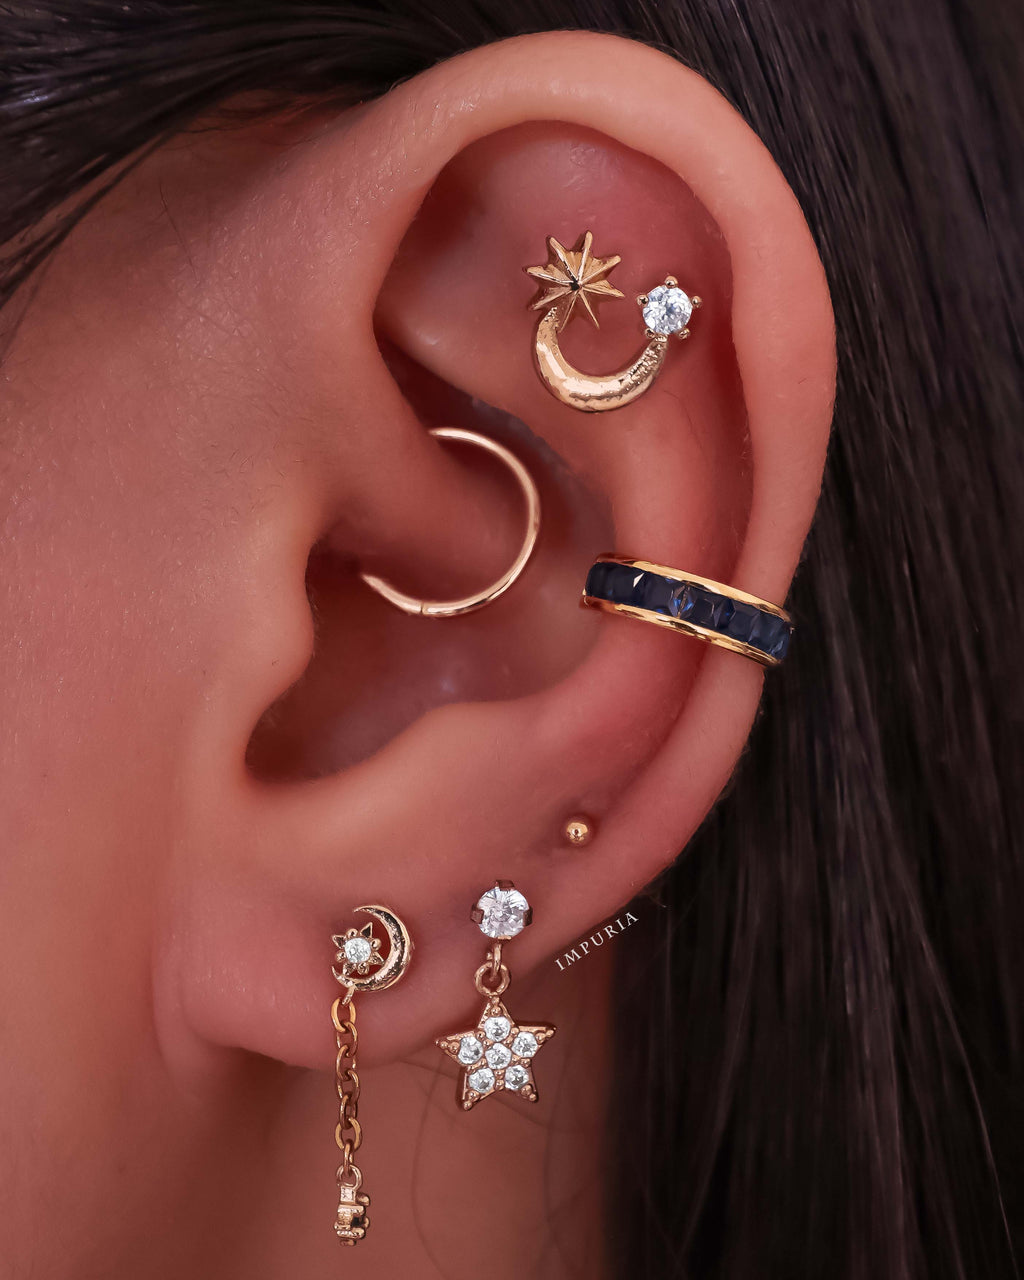 Solstice Barbell Stud Earring Helix Piercing Helix Tragus 